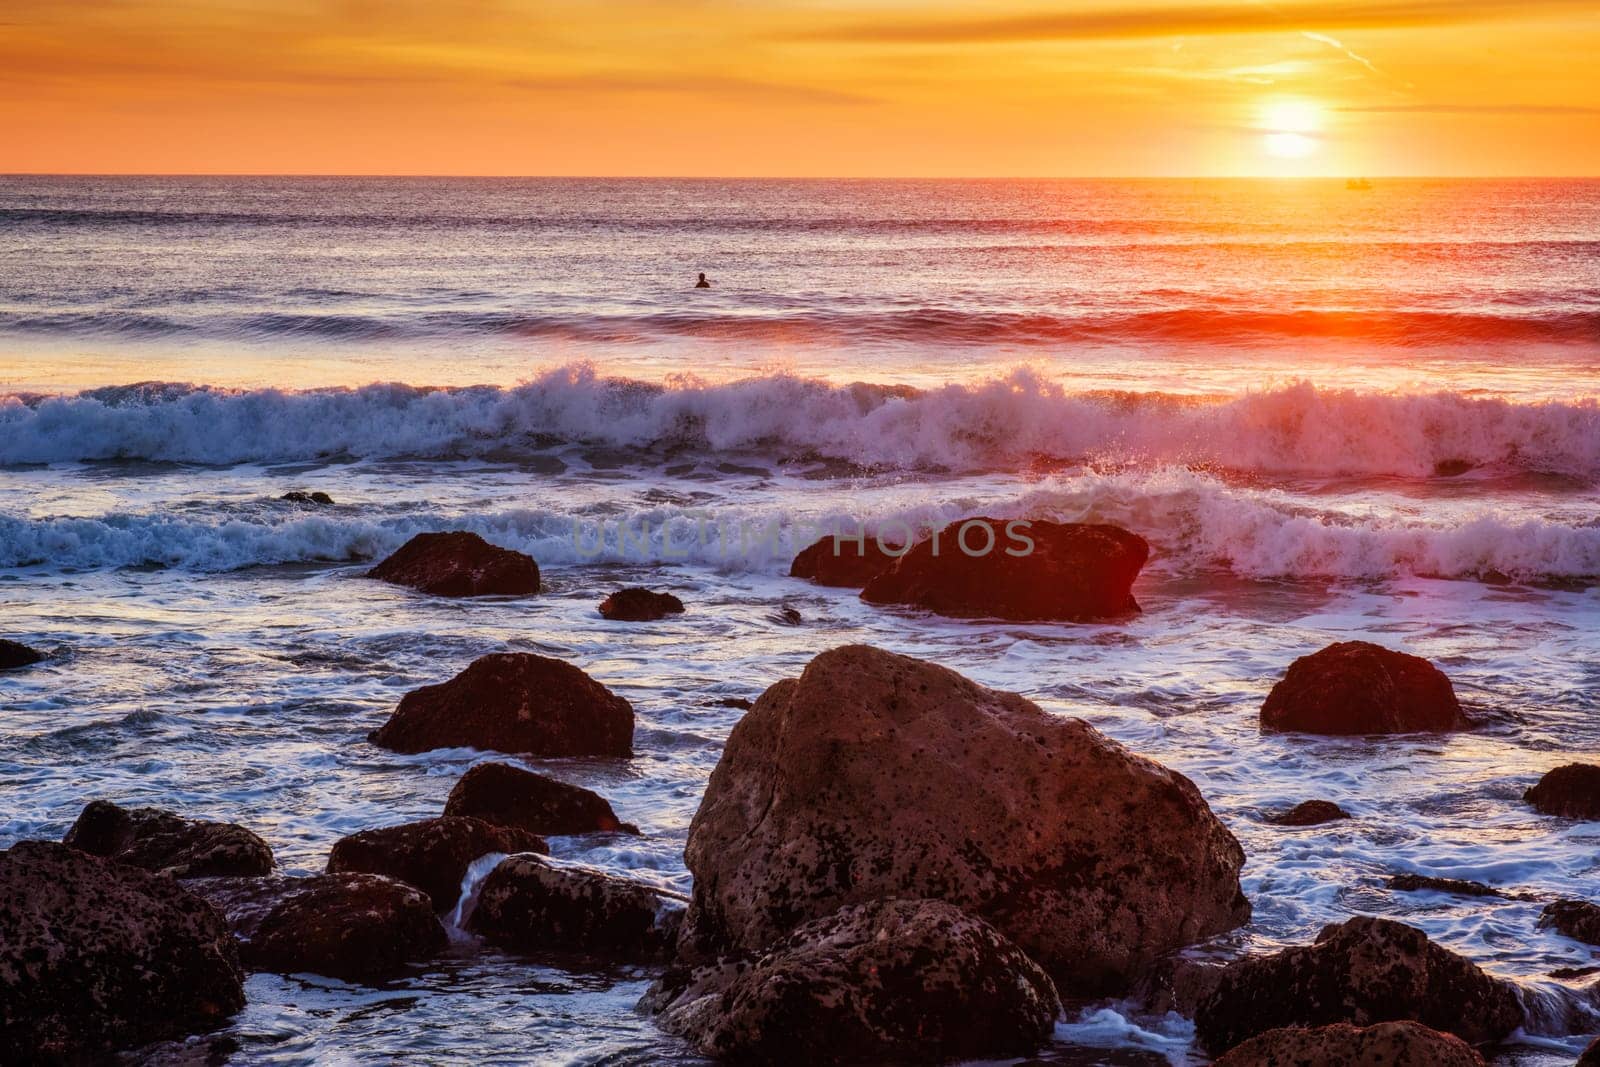 Atlantic ocean sunset with waves and rocks at Costa da Caparica, Portugal by dimol